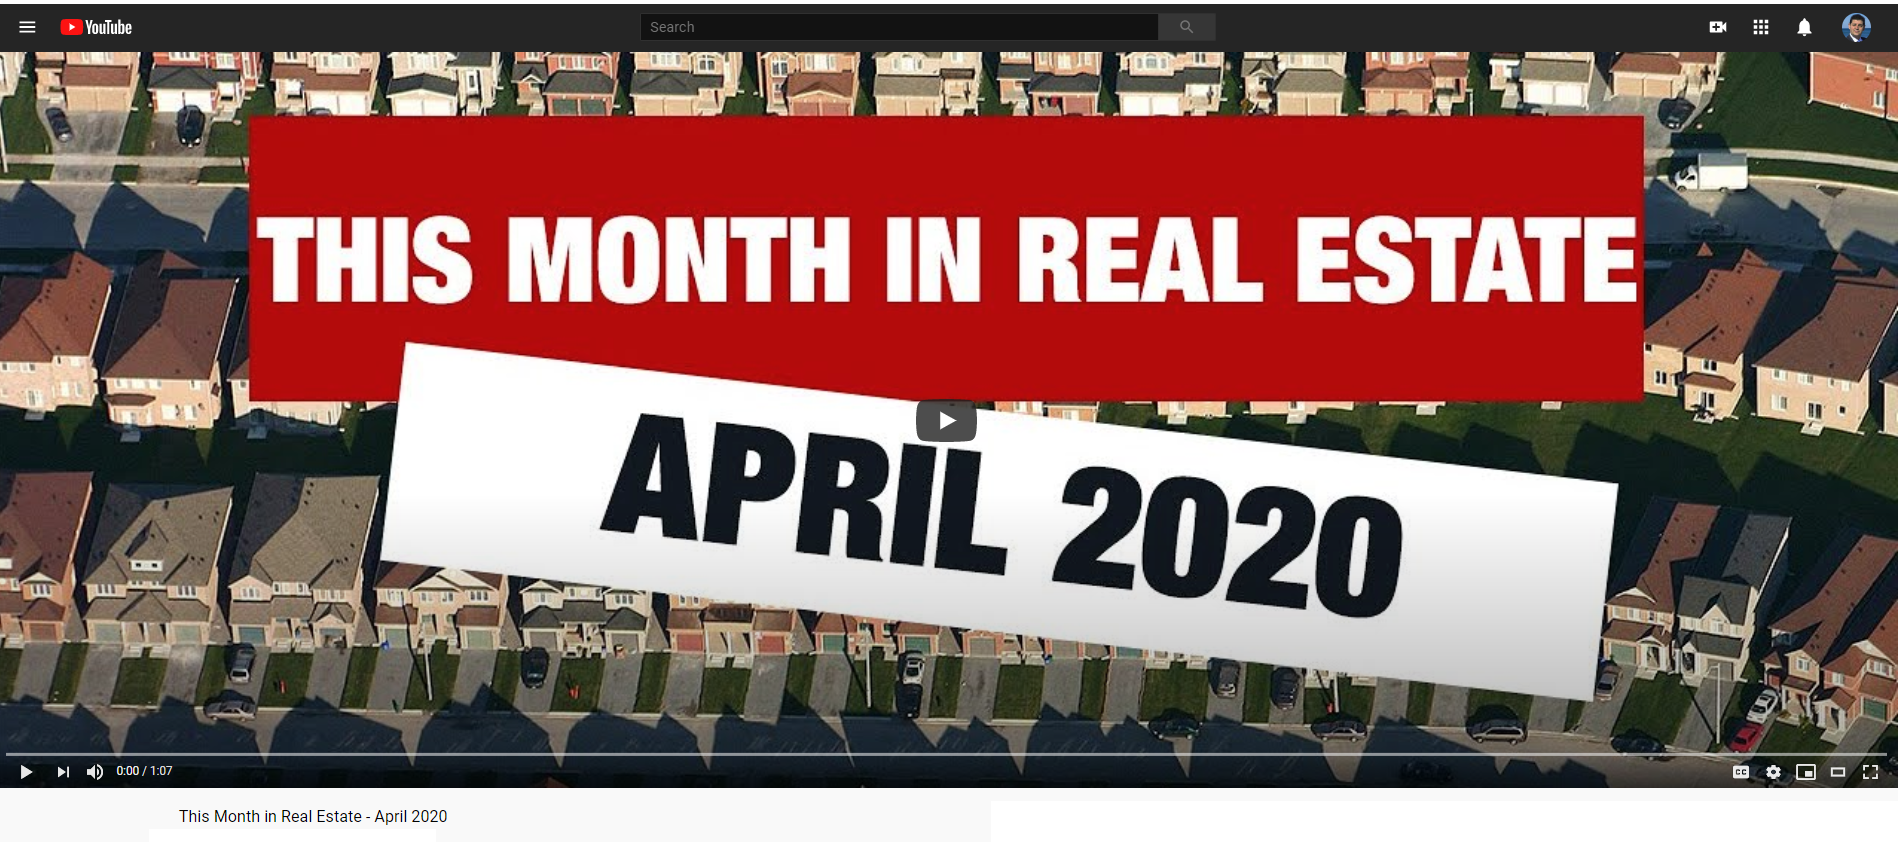 Keller Williams Realty This month in real estate April 2020 for Jean-Luc Andriot blog 041420